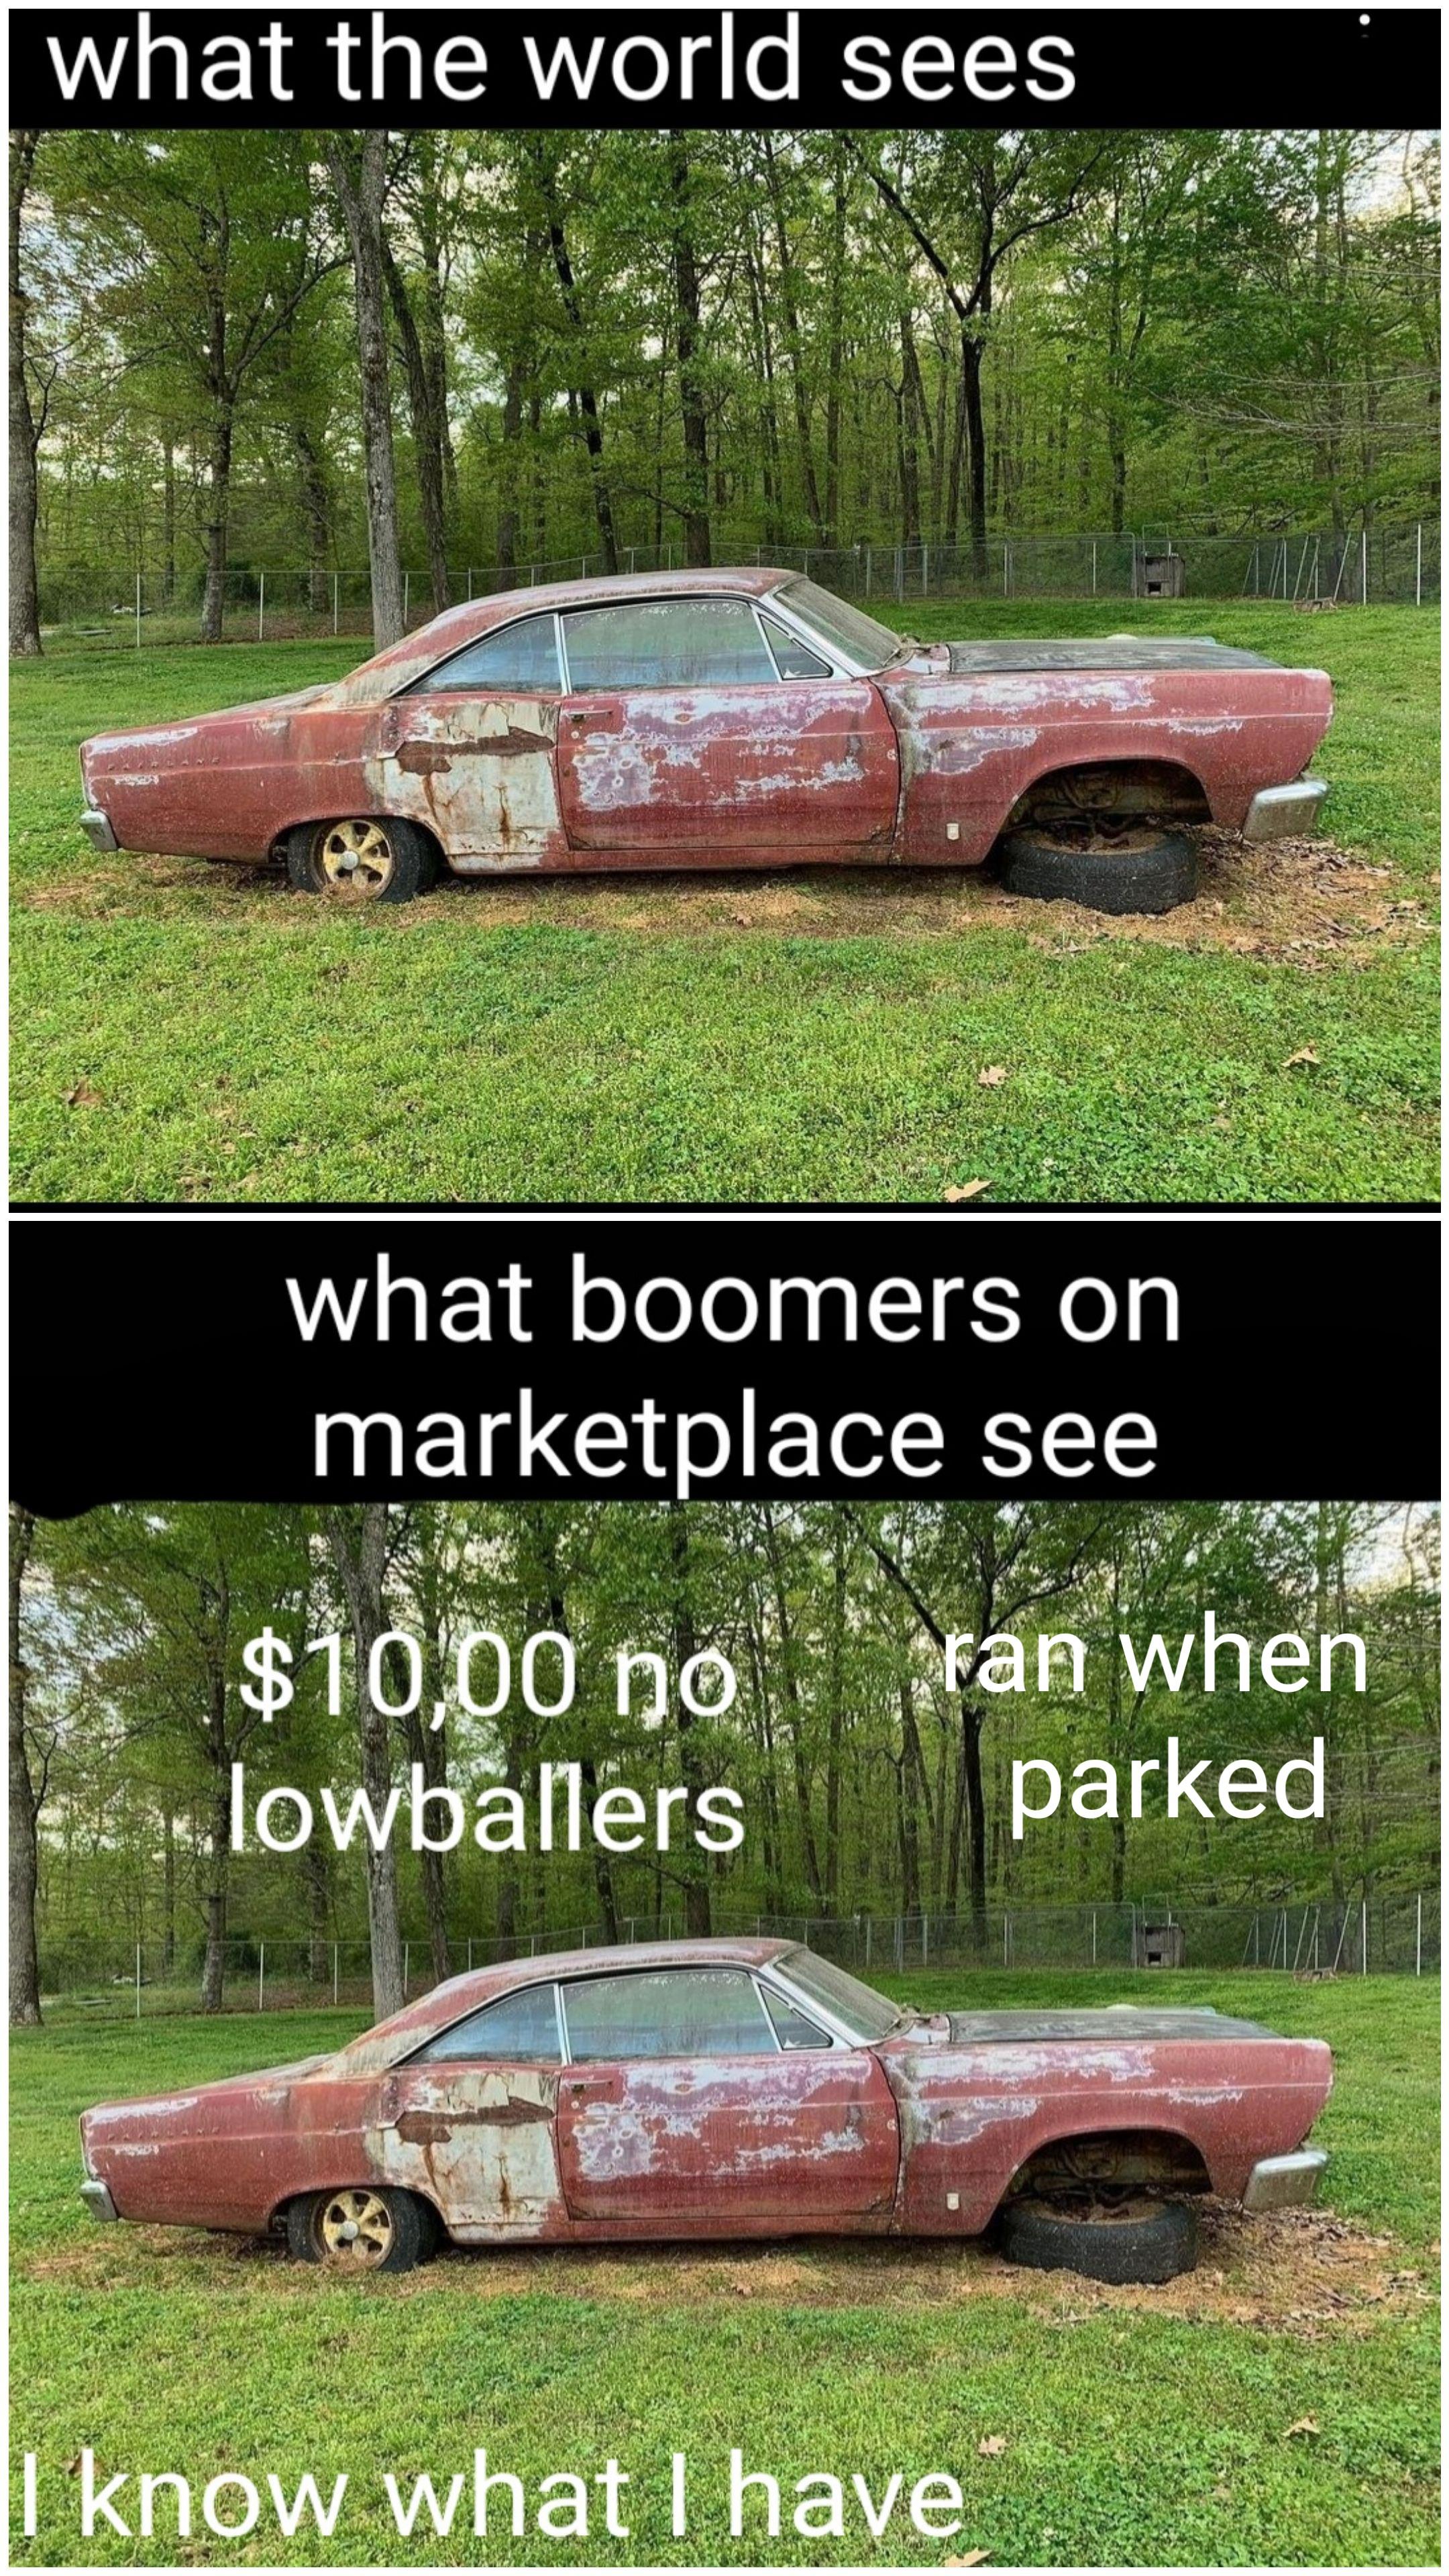 dank memes - funny memes - grass - what the world sees what boomers on marketplace see $10,00 o lowballers Fan when parked I know what I have